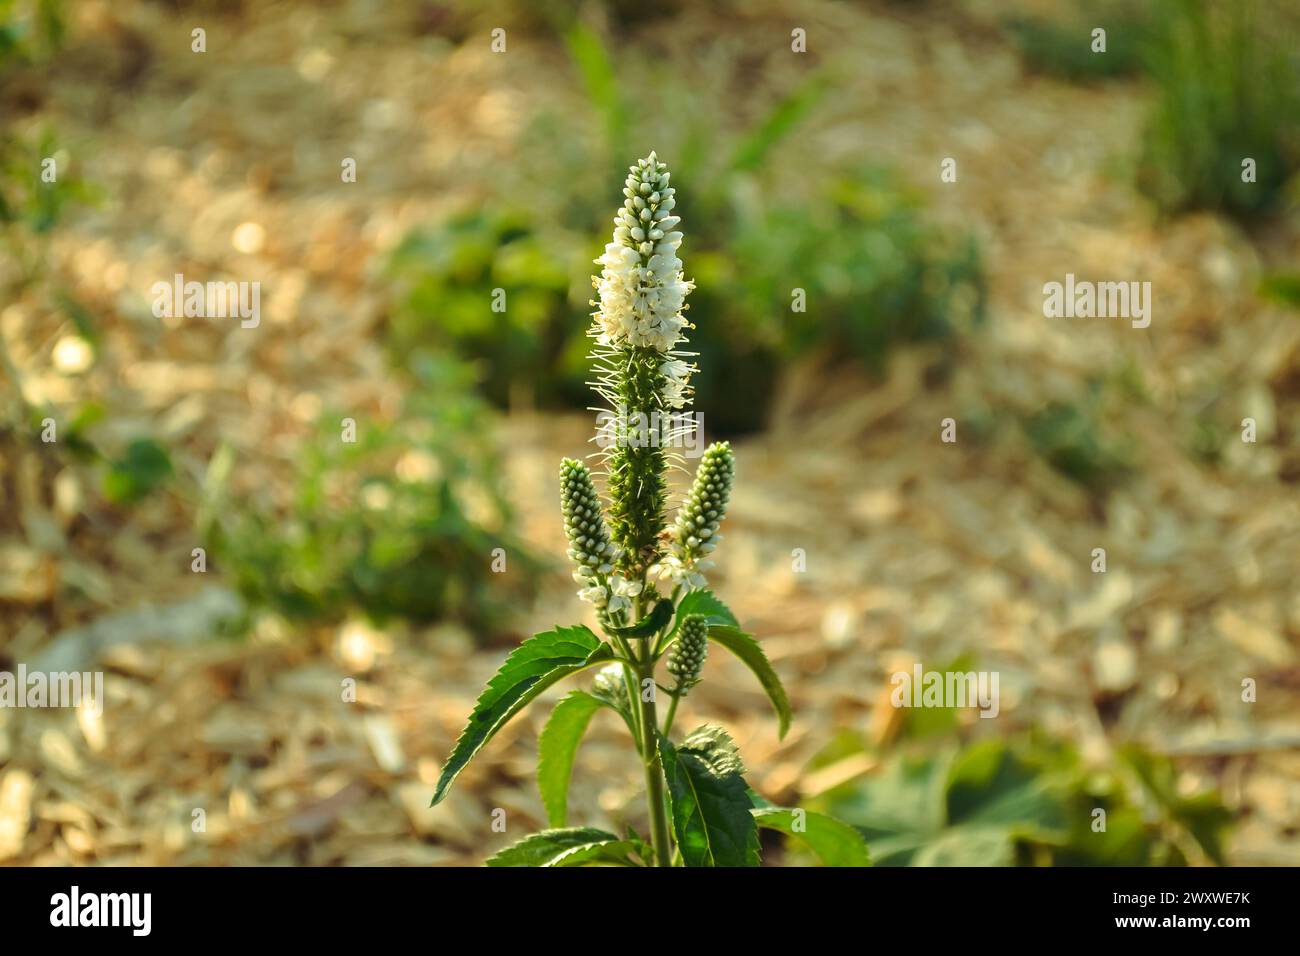 Veronica longifolia plant with white flowers and green leaves close-up against the background of green grass patches in bokeh Stock Photo